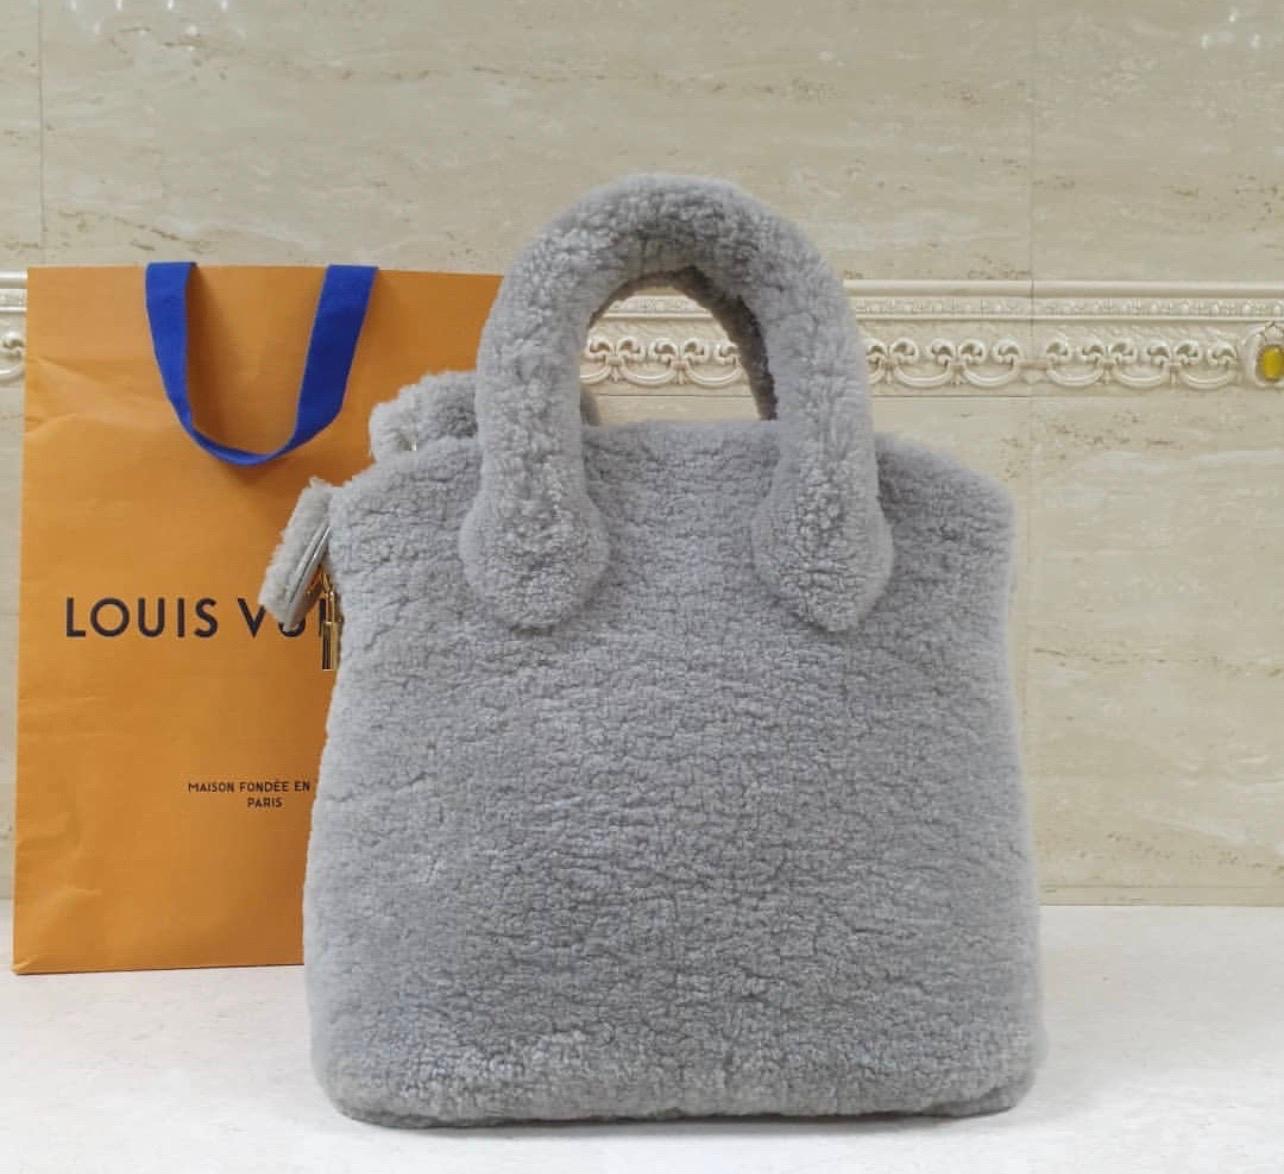 Louis Vuitton Lockit Pulsion Grey Shearling Satchel Bag In Excellent Condition For Sale In Krakow, PL